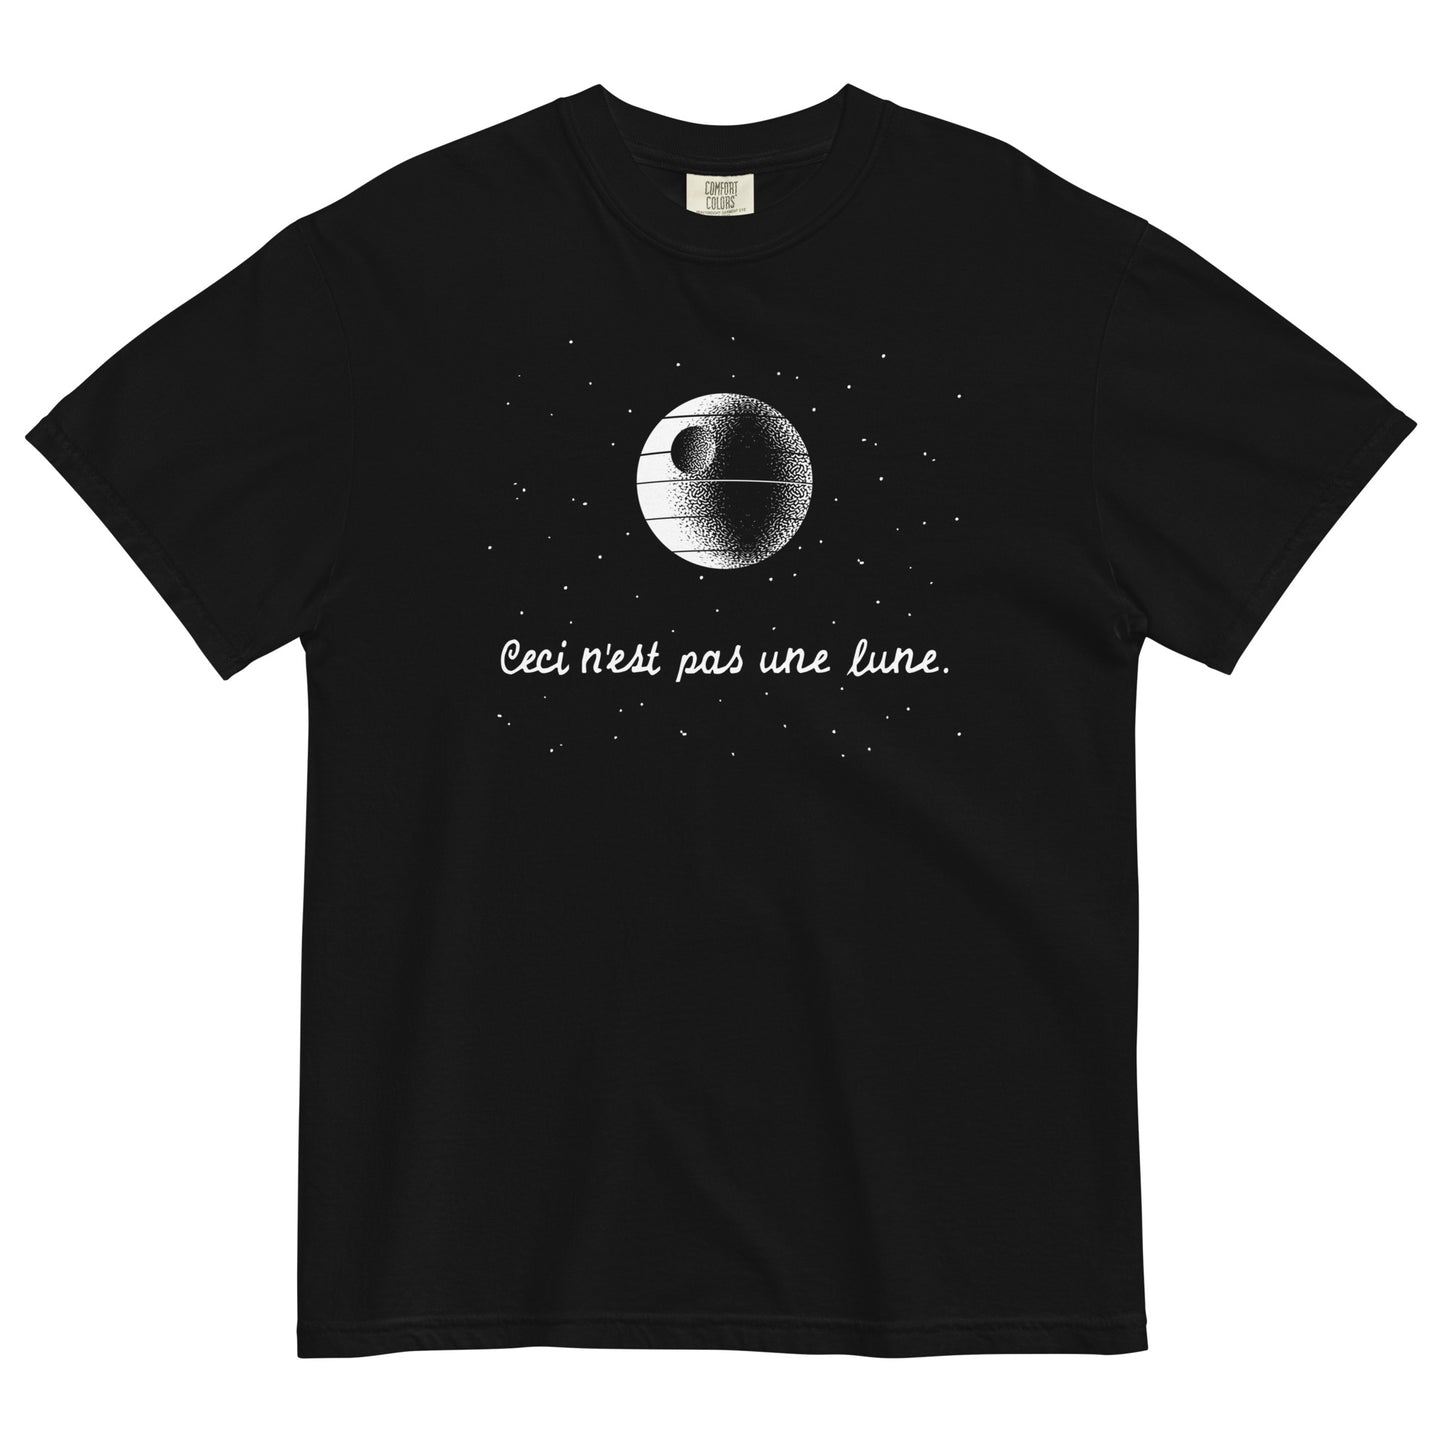 This Is Not A Moon Men's Relaxed Fit Tee